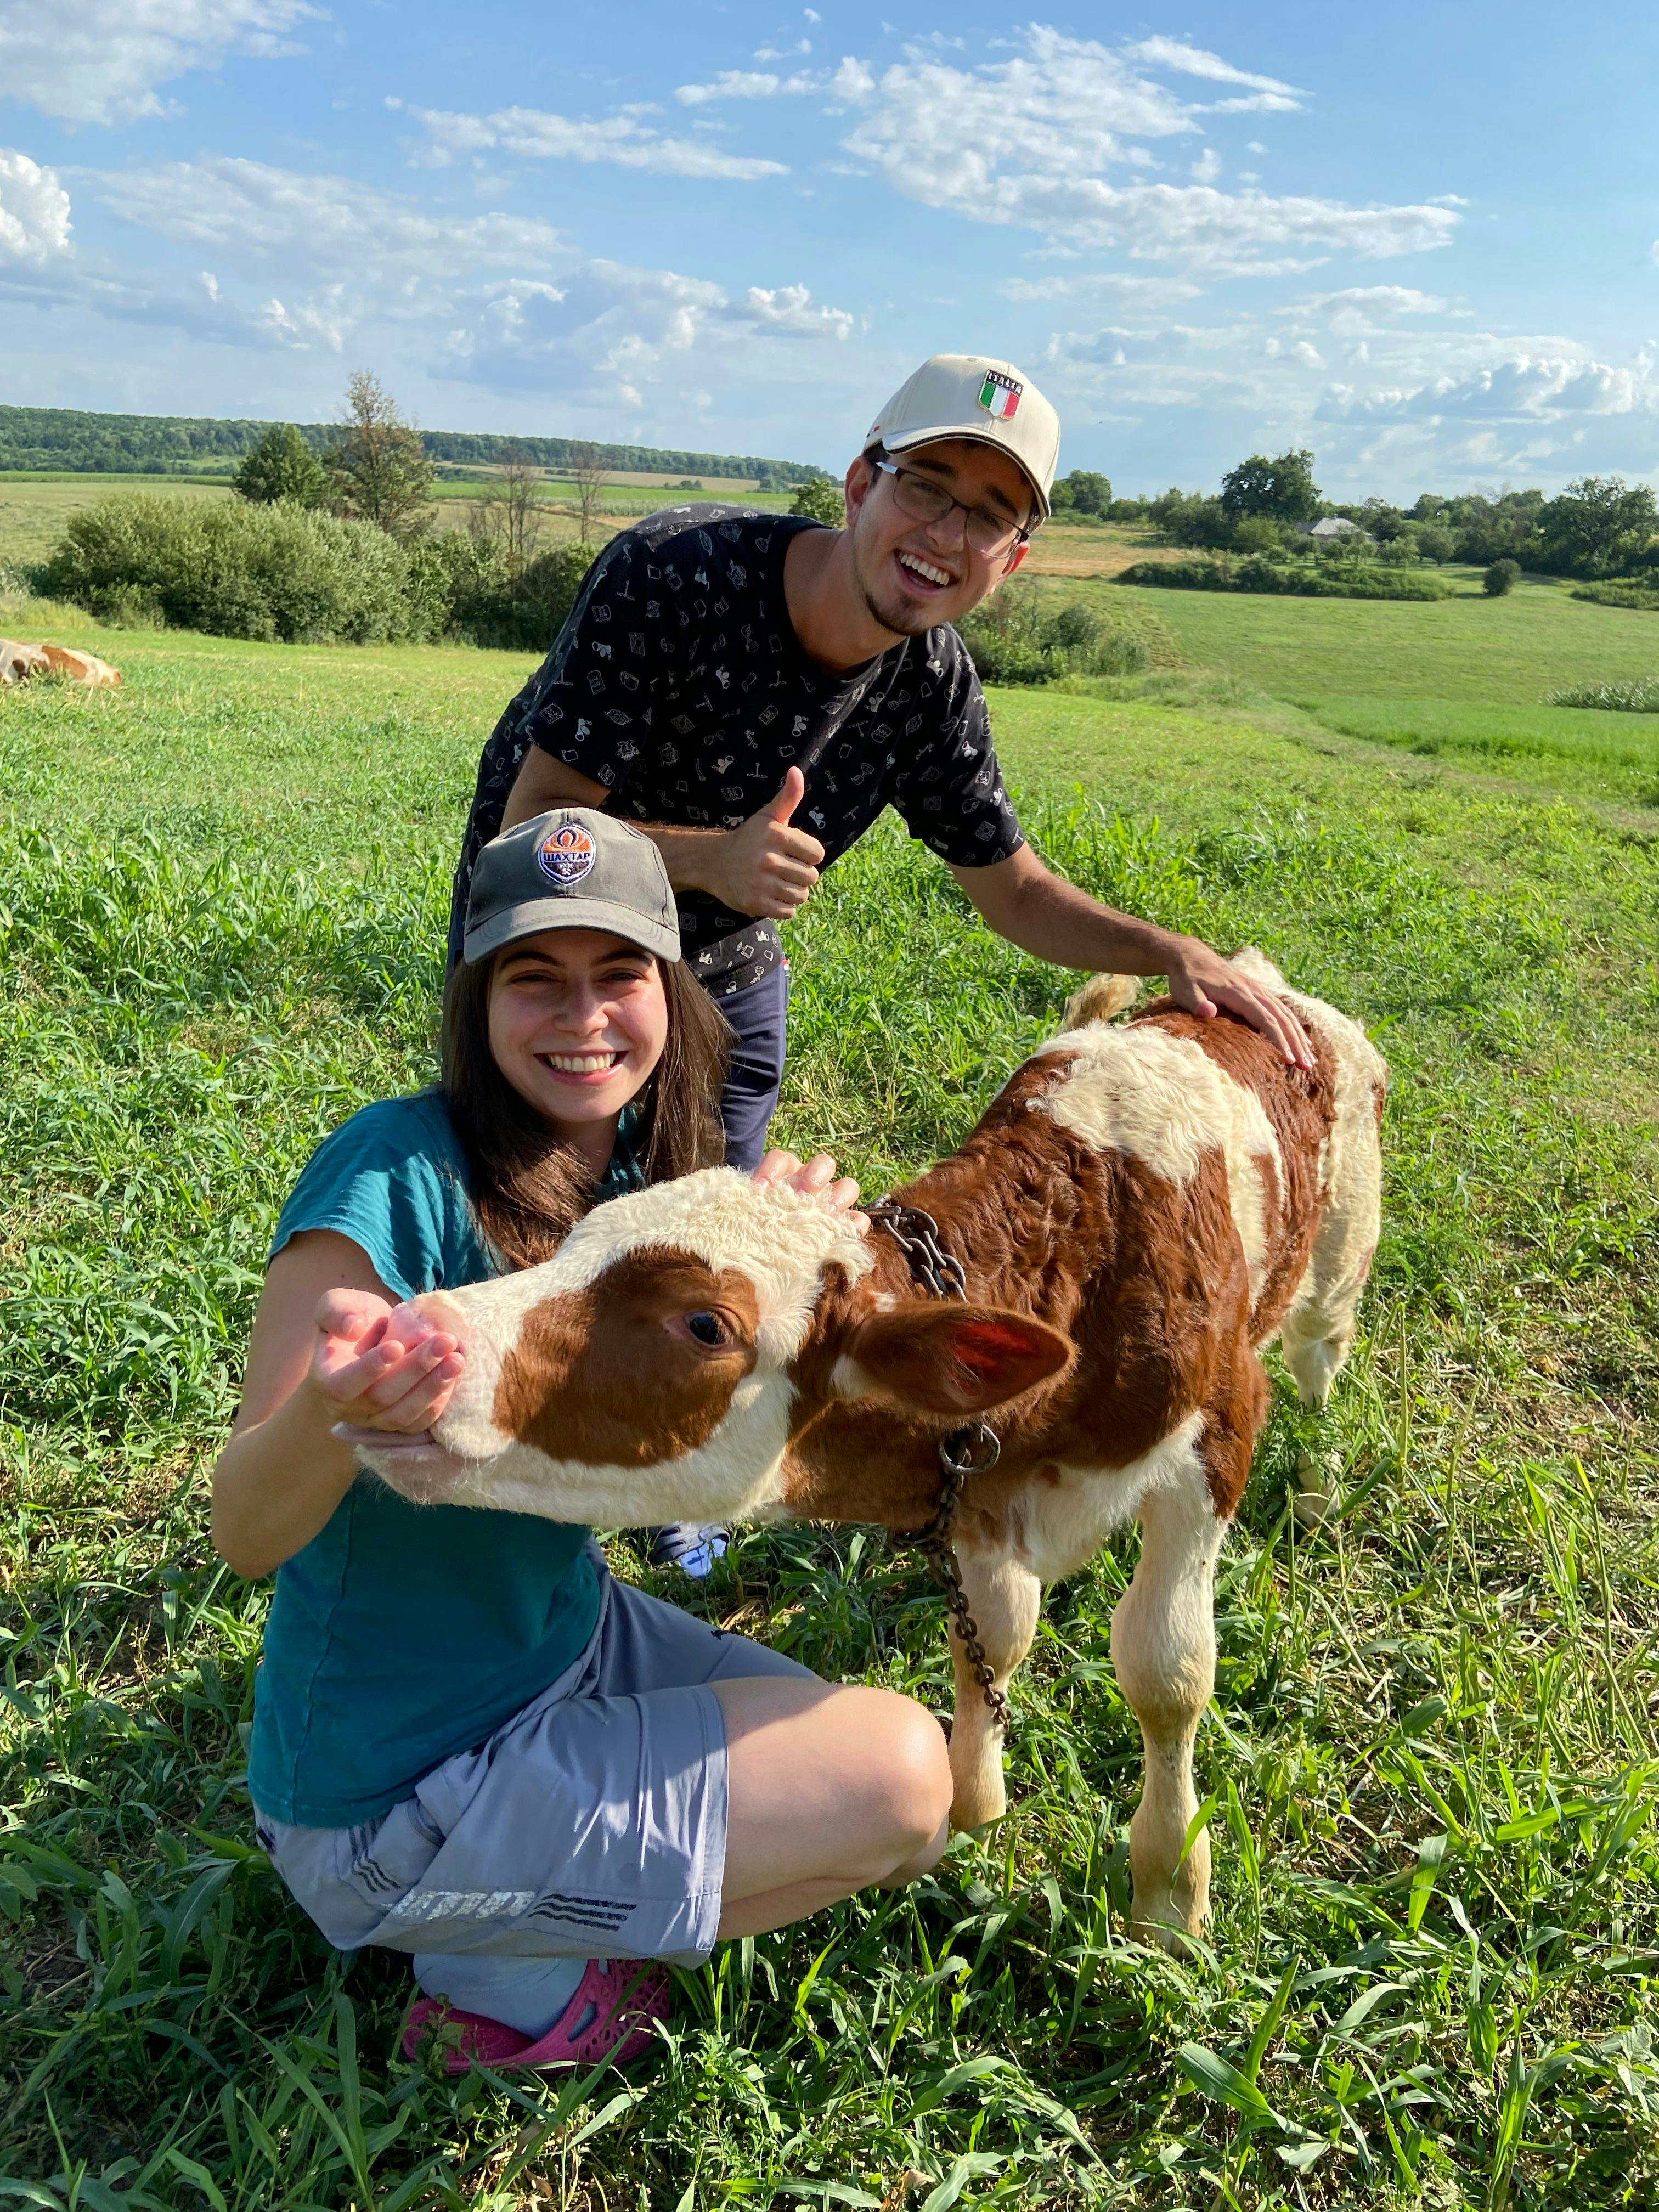 Maryna Mullerman and her boyfriend, Vlad Pinkhasov, make friends with a calf in the countryside outside of Kharkiv, Ukraine, in August 2021.